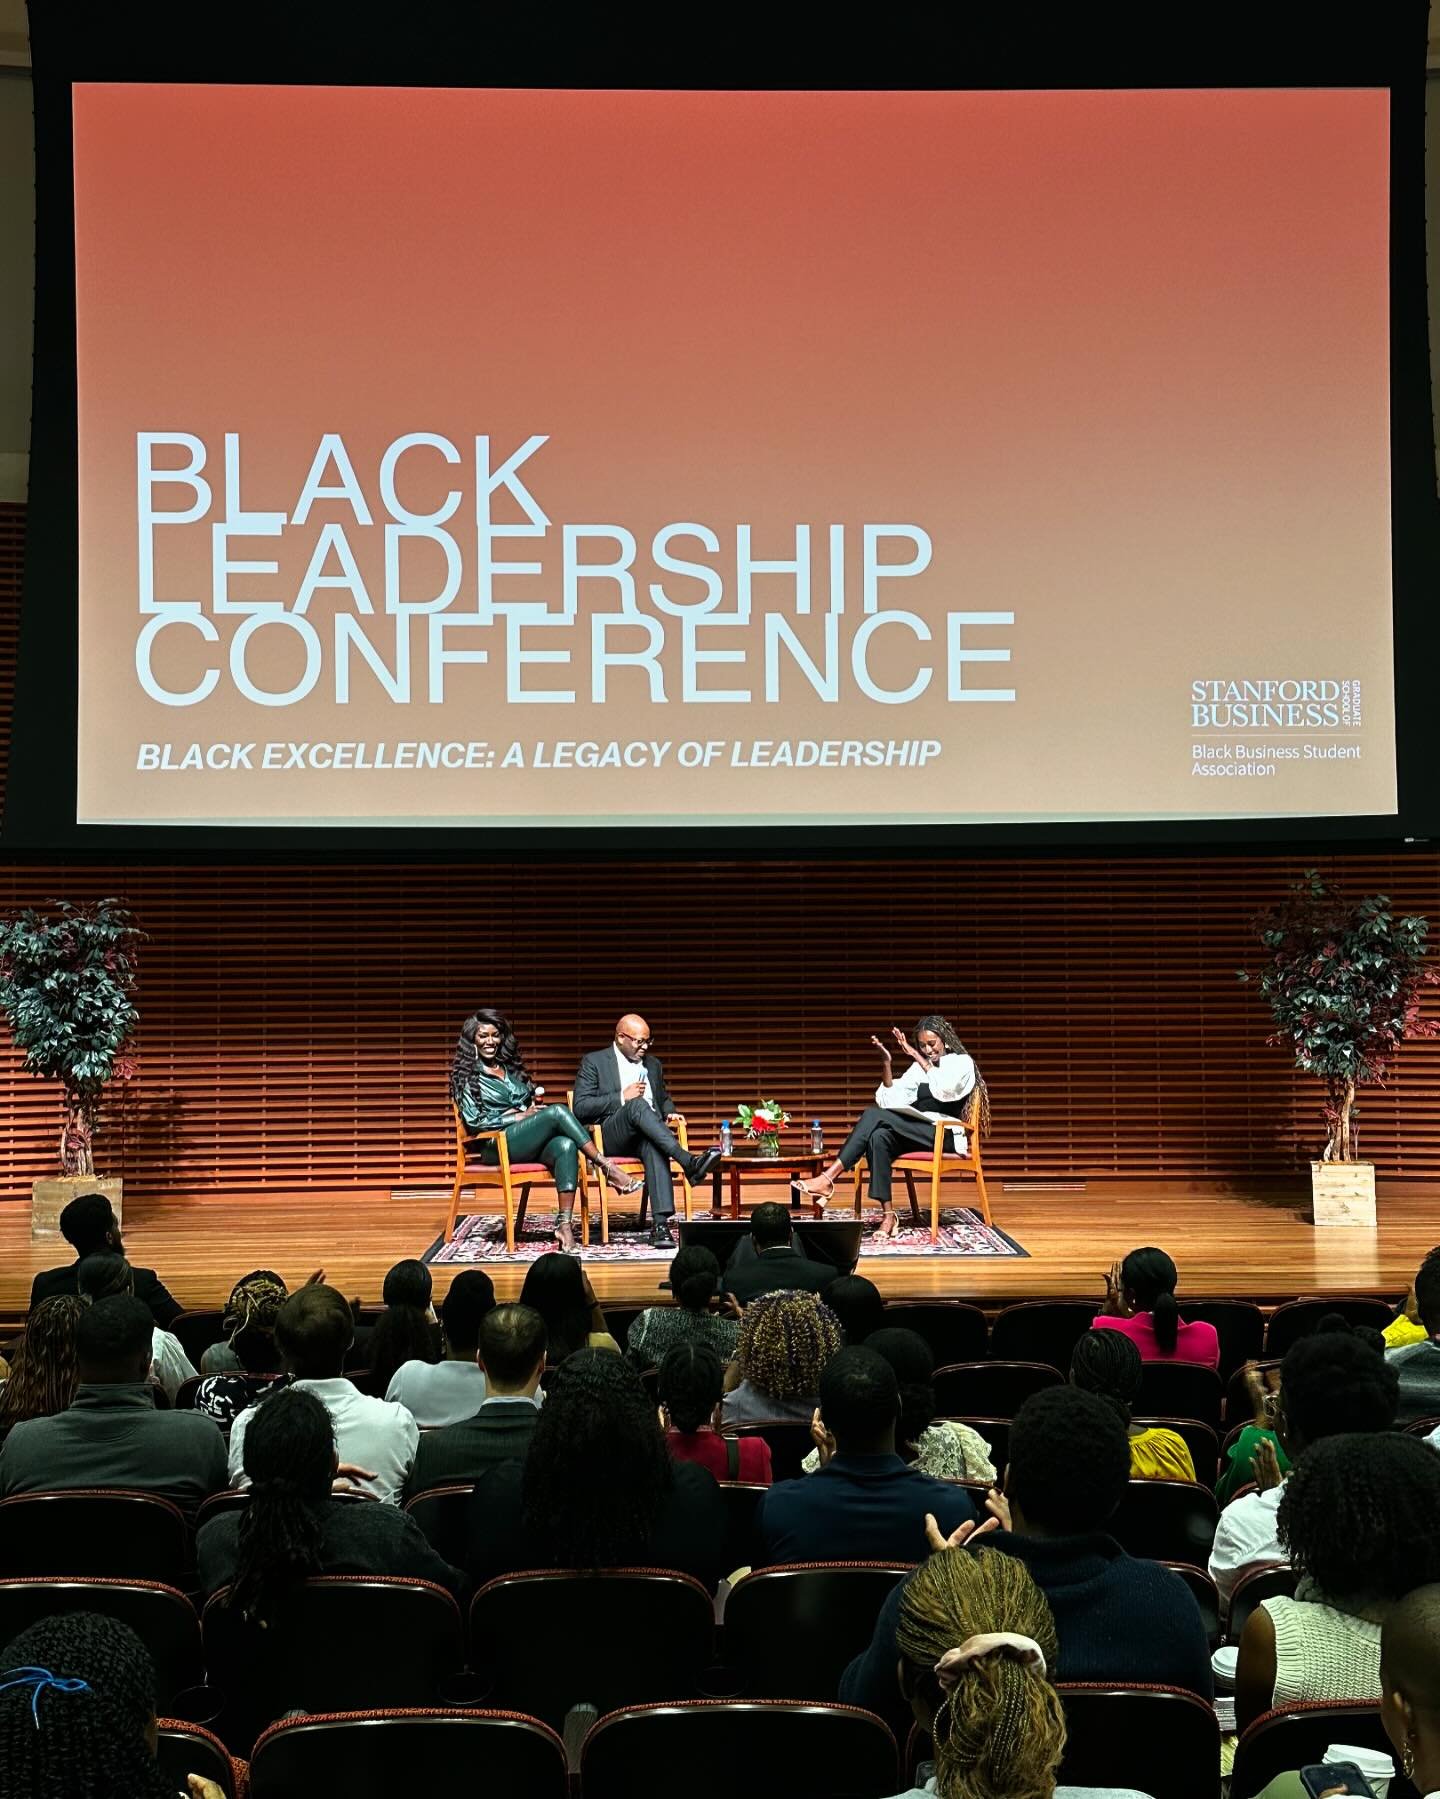 A few moments from one of my favorite events to photograph The Black Leadership Conference at Stanford put on by @blackatgsb This is our 3rd year capturing it and it never disappoints.  I always leave inspired, energized and ready to take on what&rsq